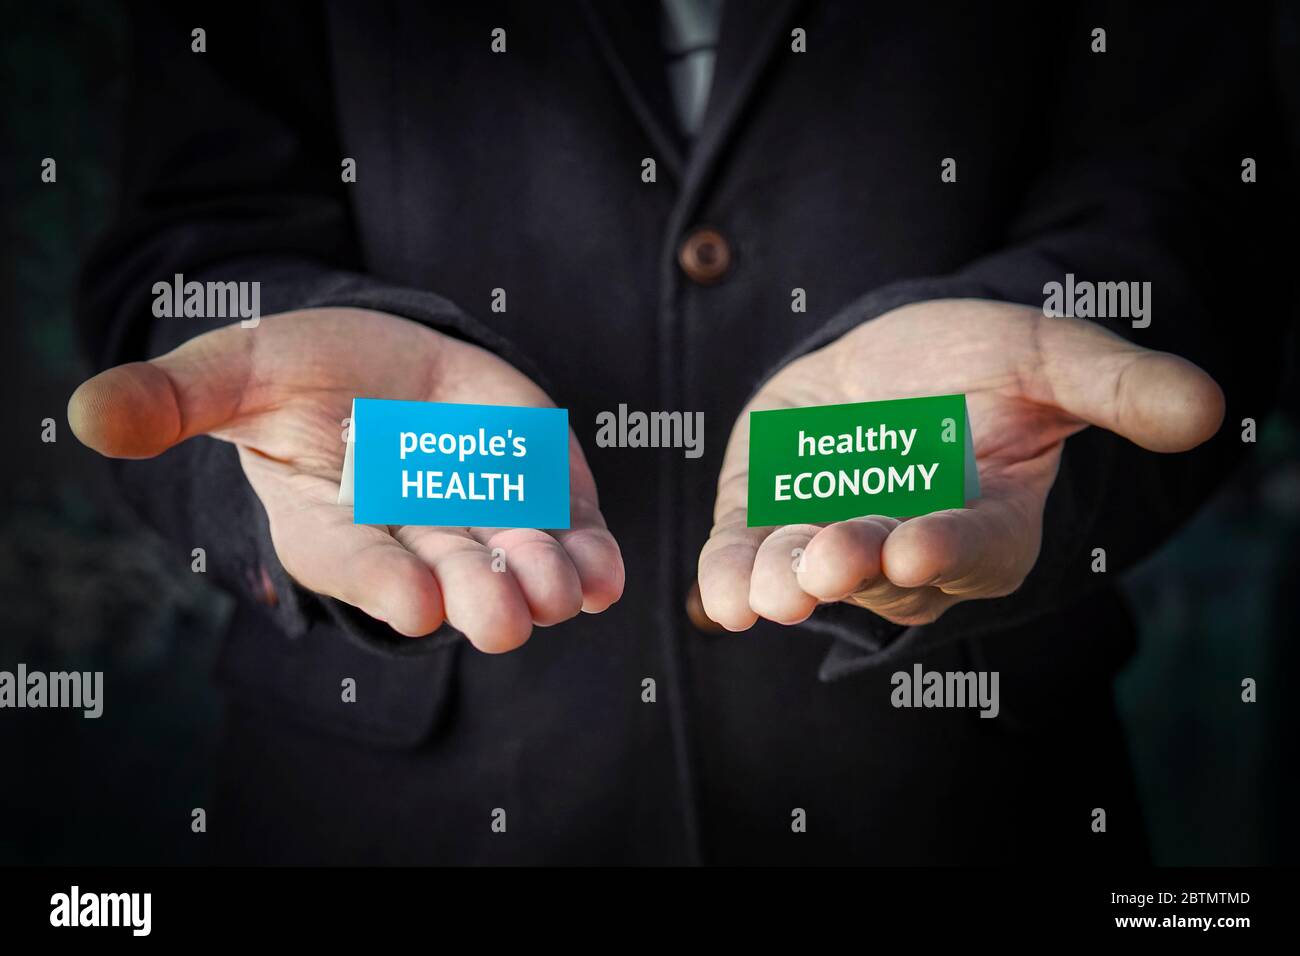 balanced decision between human health or maintaining the economy during the covid-19 coronavirus pandemic. Economic crisis or risk of infection is a Stock Photo